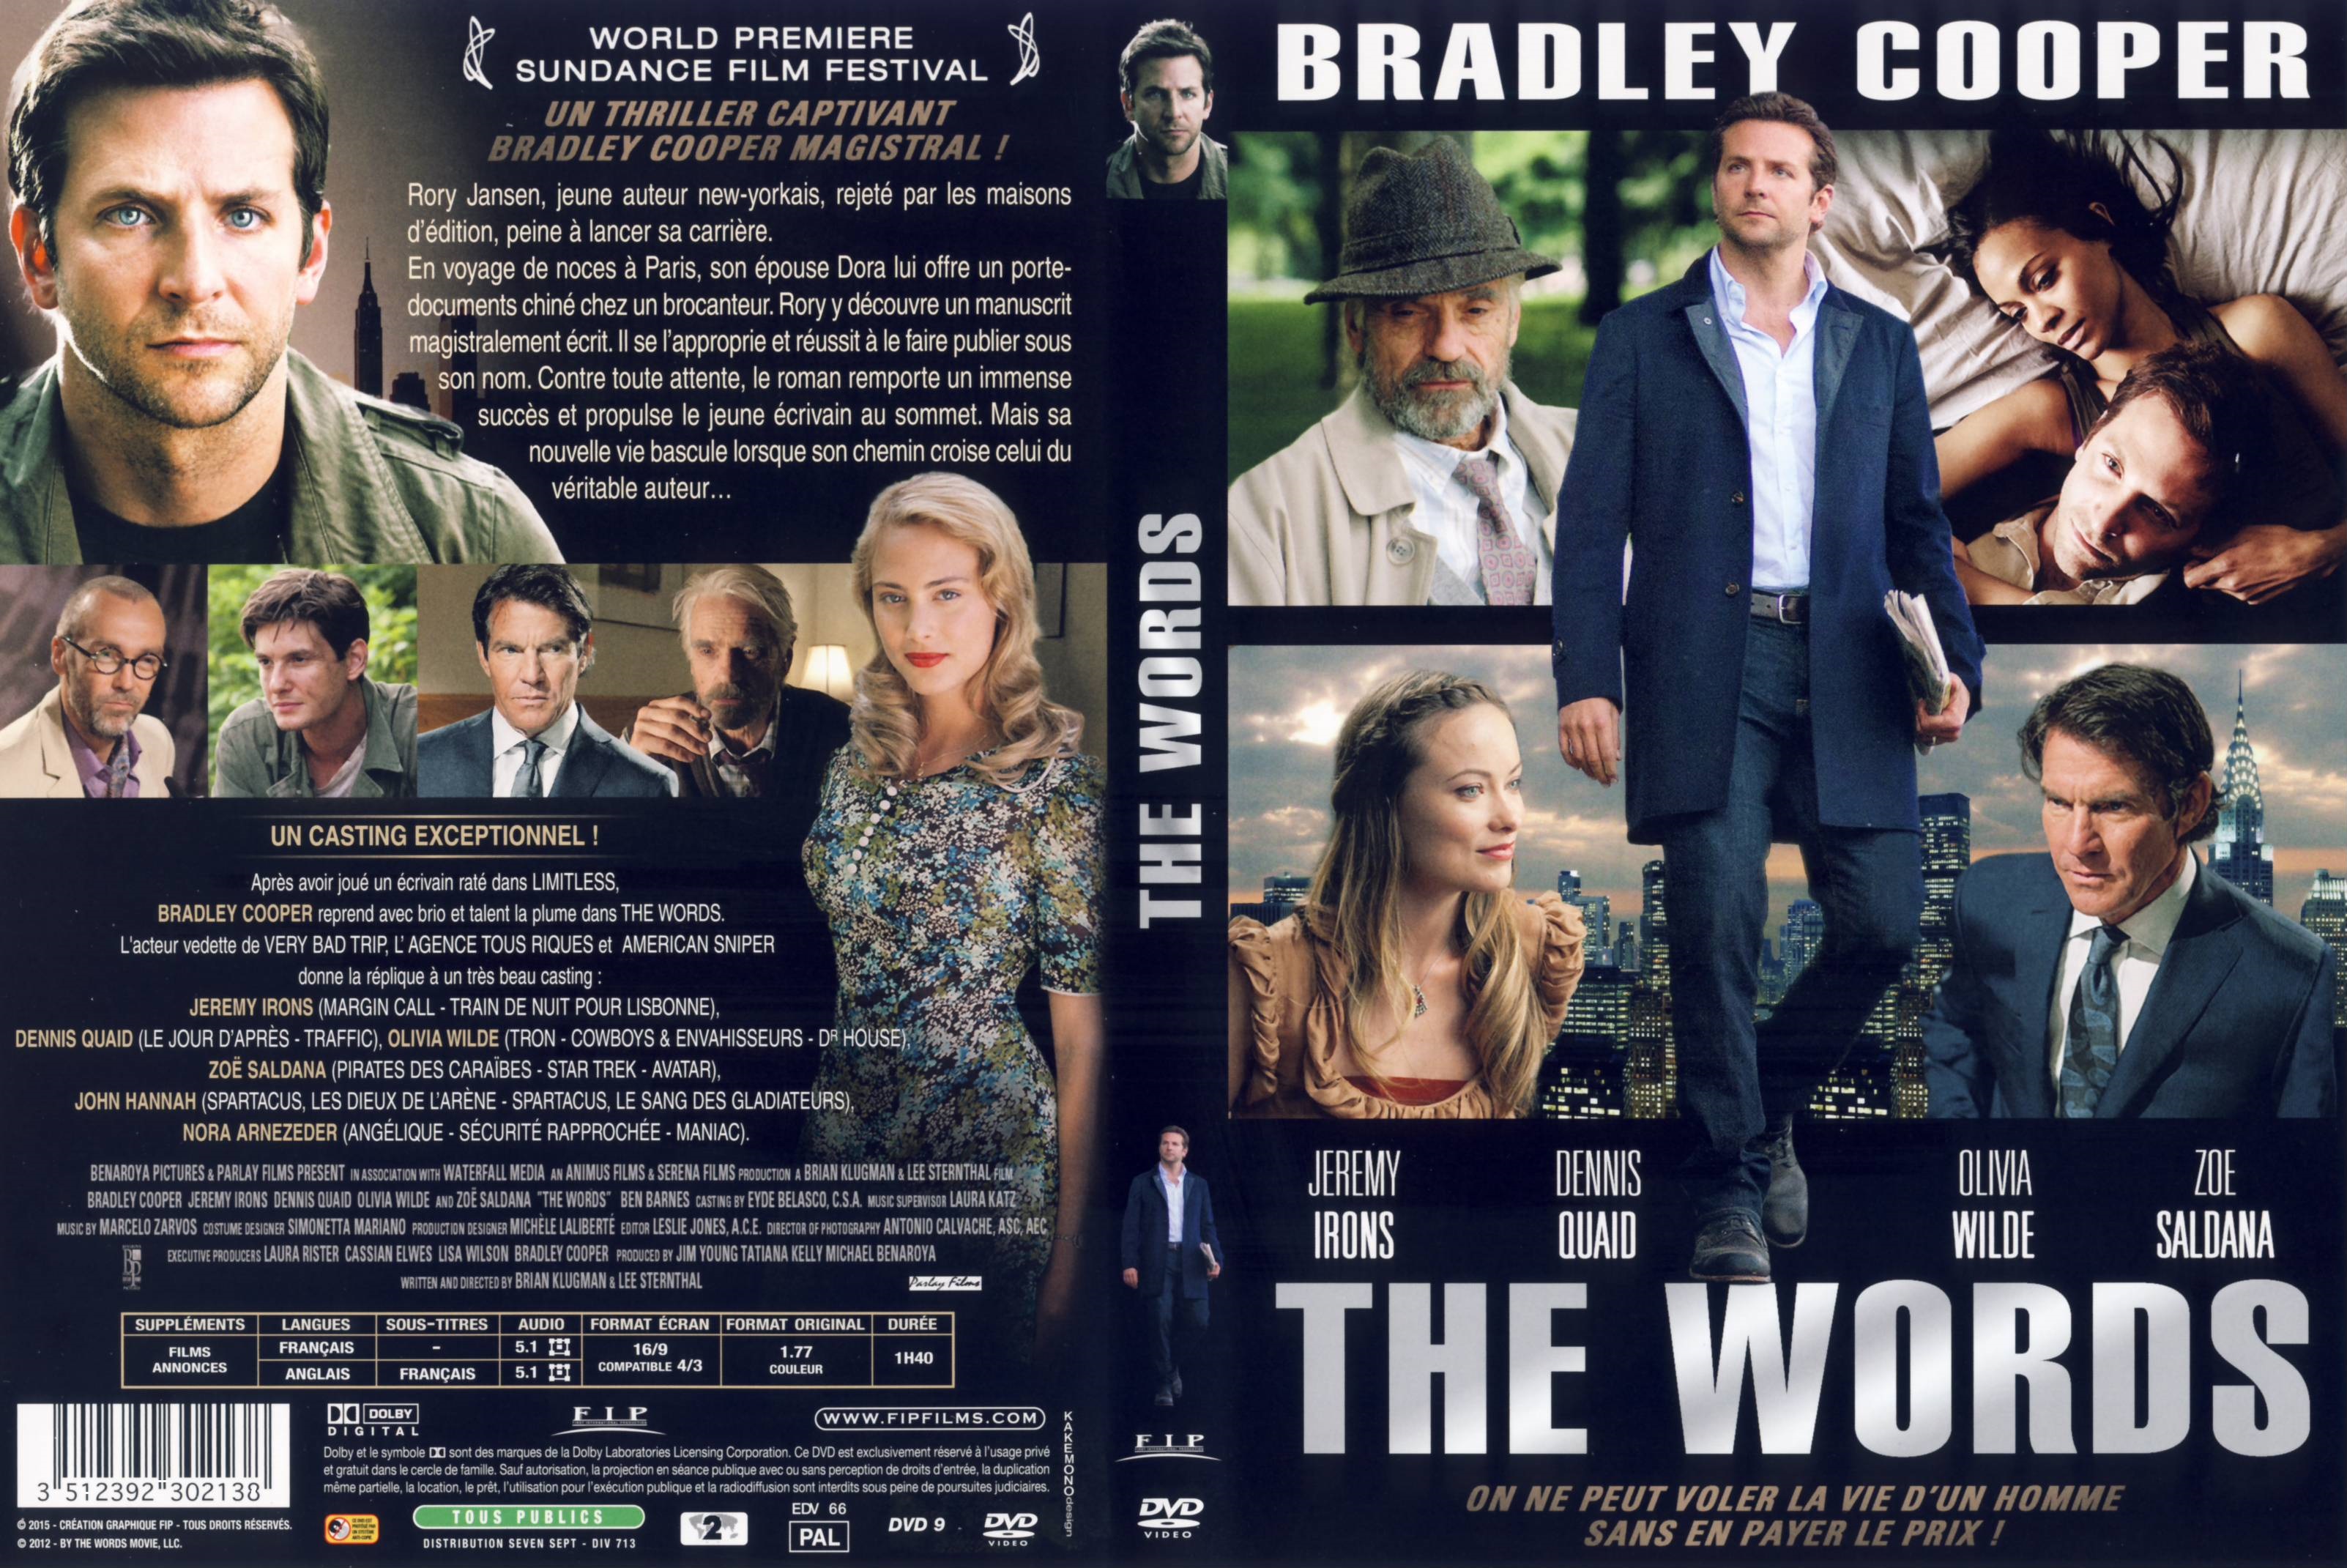 Jaquette DVD The Words